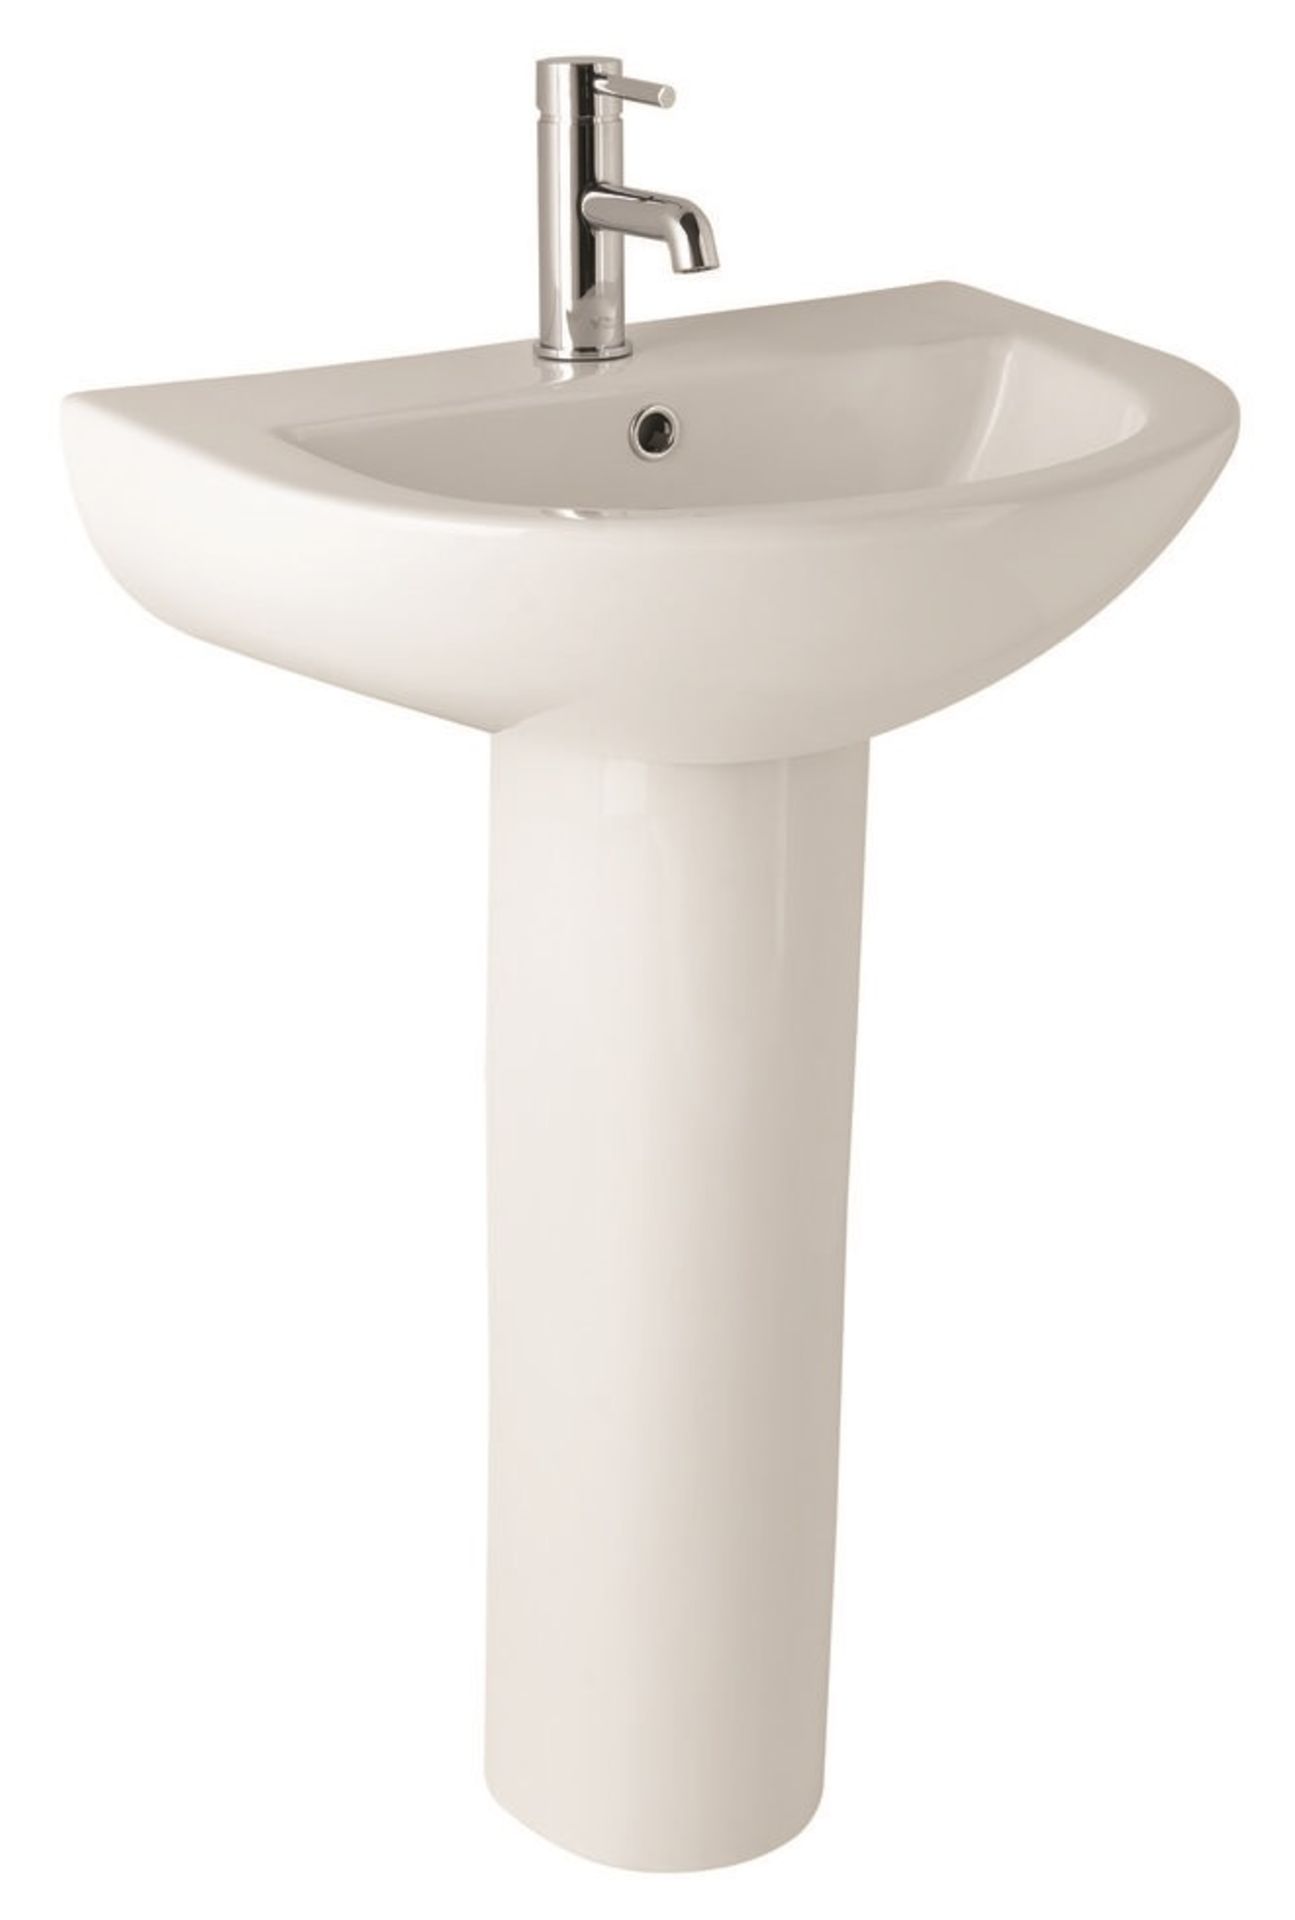 20 x Vogue Bathrooms COMFORT Single Tap Hole SINK BASINS With Pedestals - 550mm Width - Brand New - Image 2 of 2